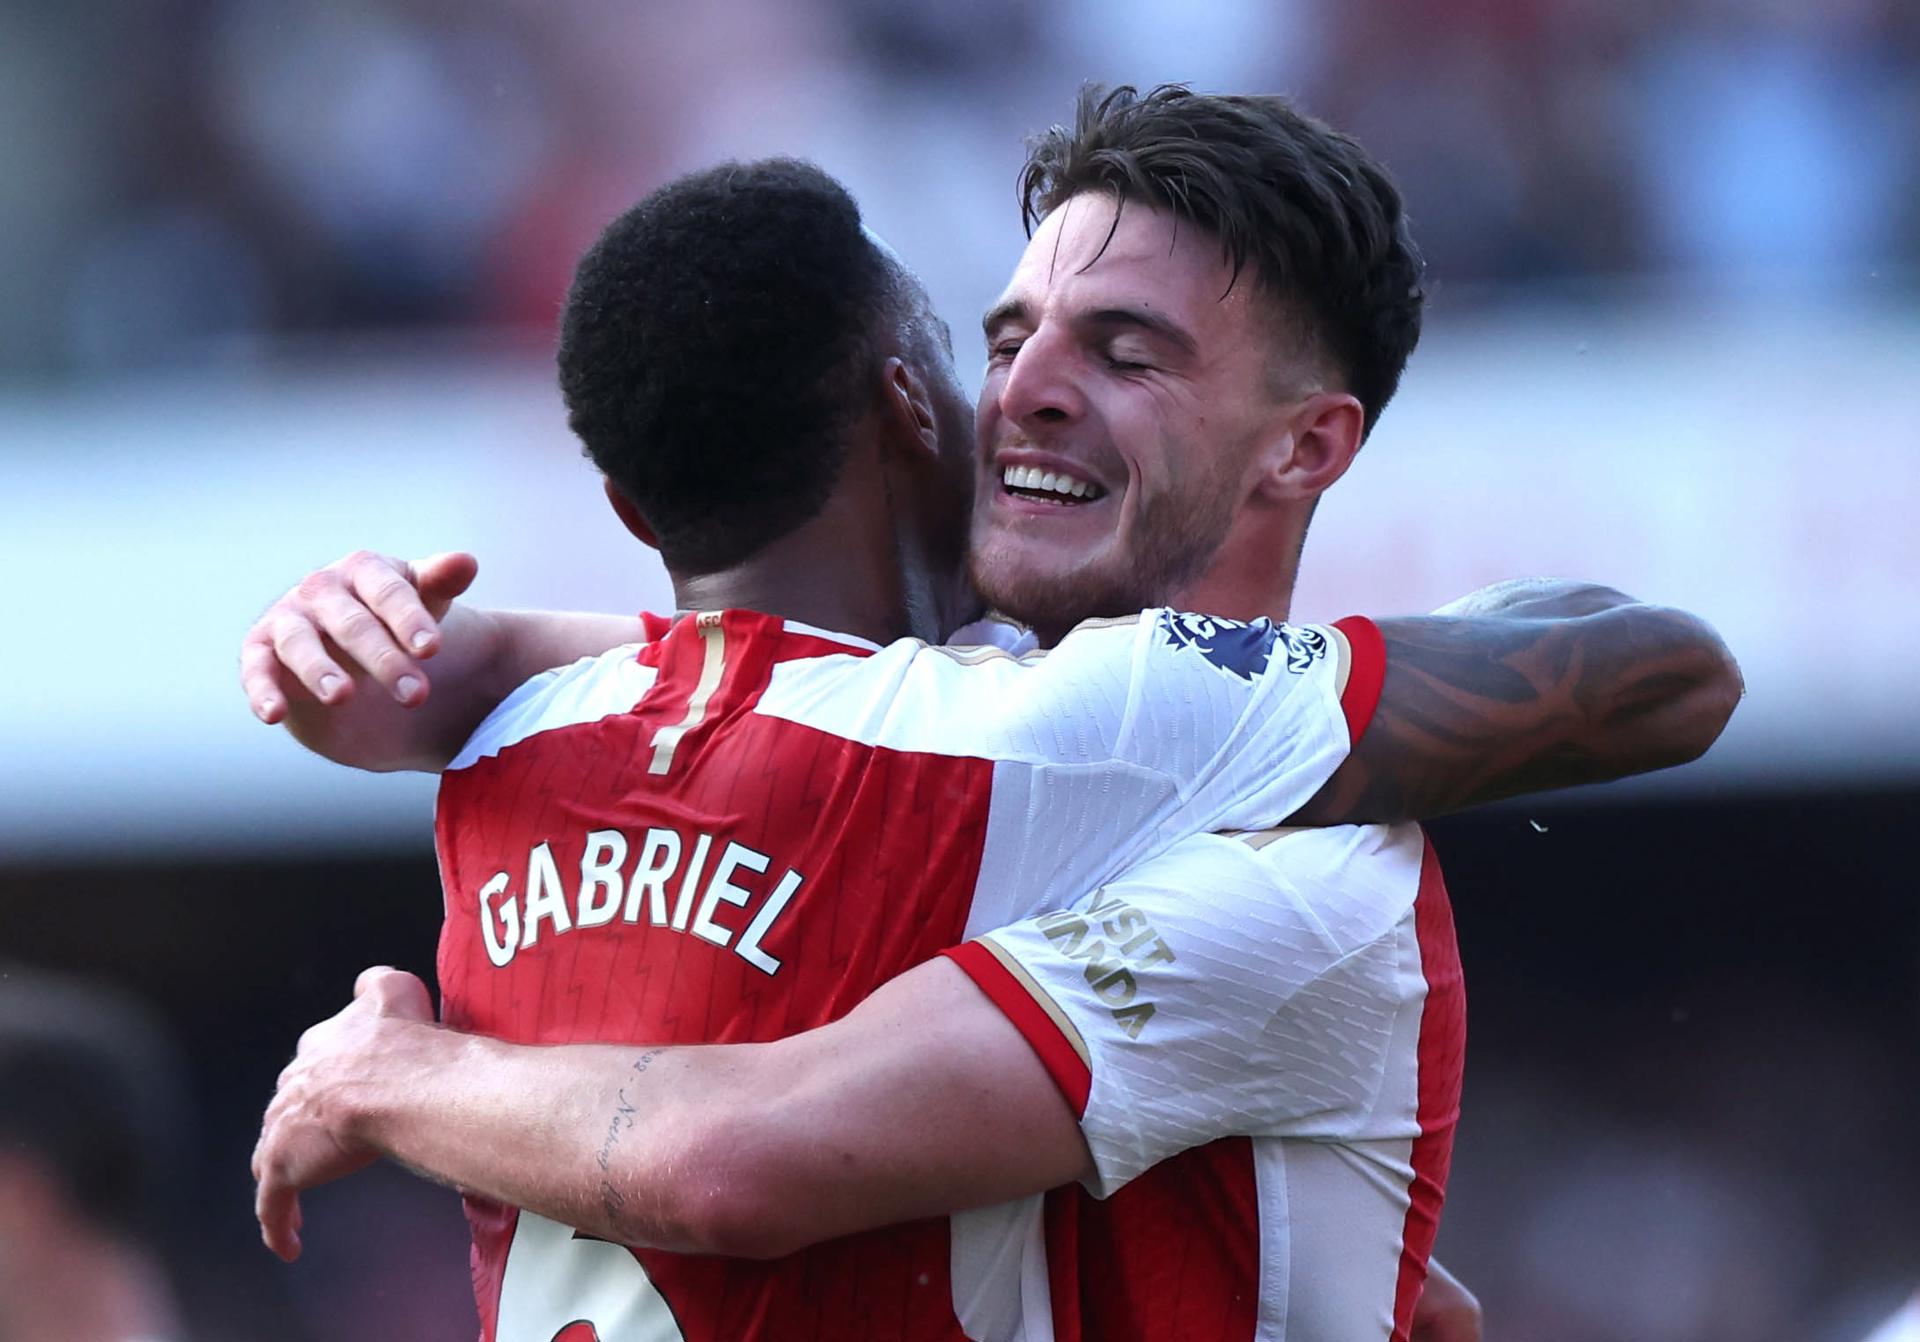 Arsenal's Declan Rice celebrates with his teammate Gabriel Jesus after winning the English Premier League soccer match between Arsenal FC and Manchester United, in London, Britain, 03 September 2023. EFE/EPA/NEIL HALL EDITORIAL USE ONLY. No use with unauthorized audio, video, data, fixture lists, club/league logos or 'live' services. Online in-match use limited to 120 images, no video emulation. No use in betting, games or single club/league/player publications.